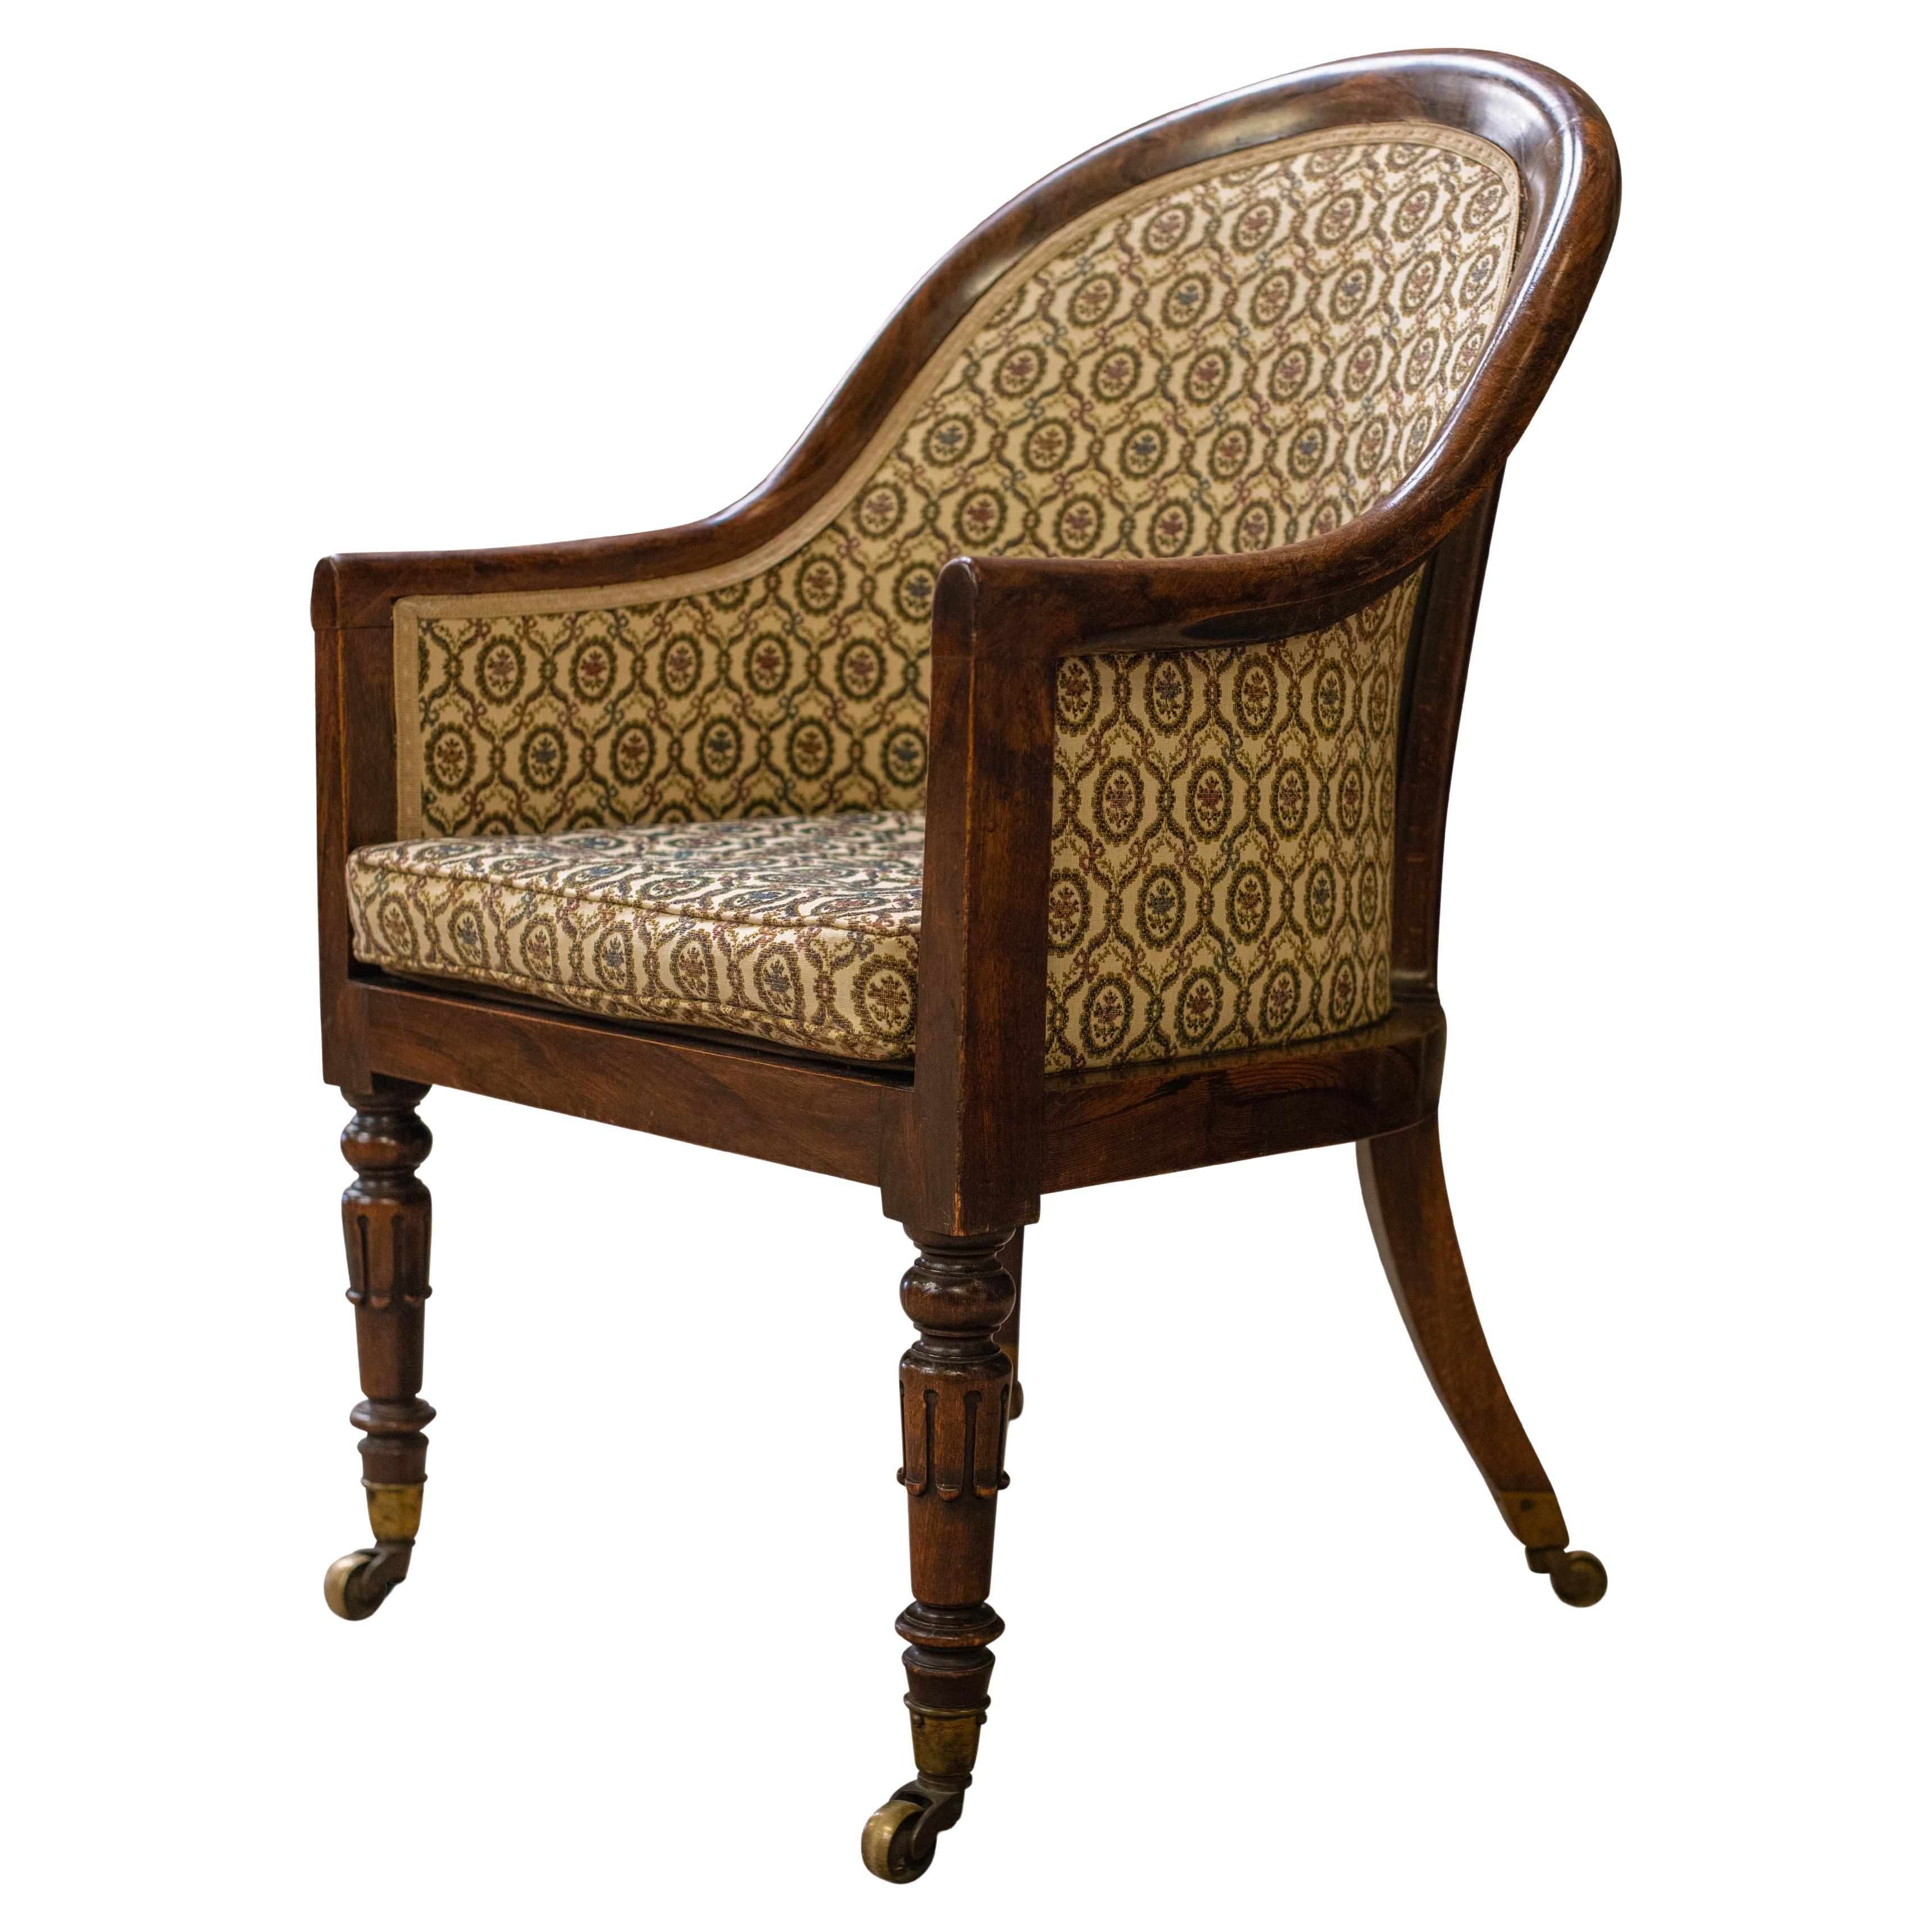 A William IV Mahogany Tub Chair, On Petal Carved And Ring Turned Supports And Finished With Brass Caps And Castors.

Would suite a period style or modern library, or living room setting. 

Additional dimensions 

Width of seat 47cm
Depth of